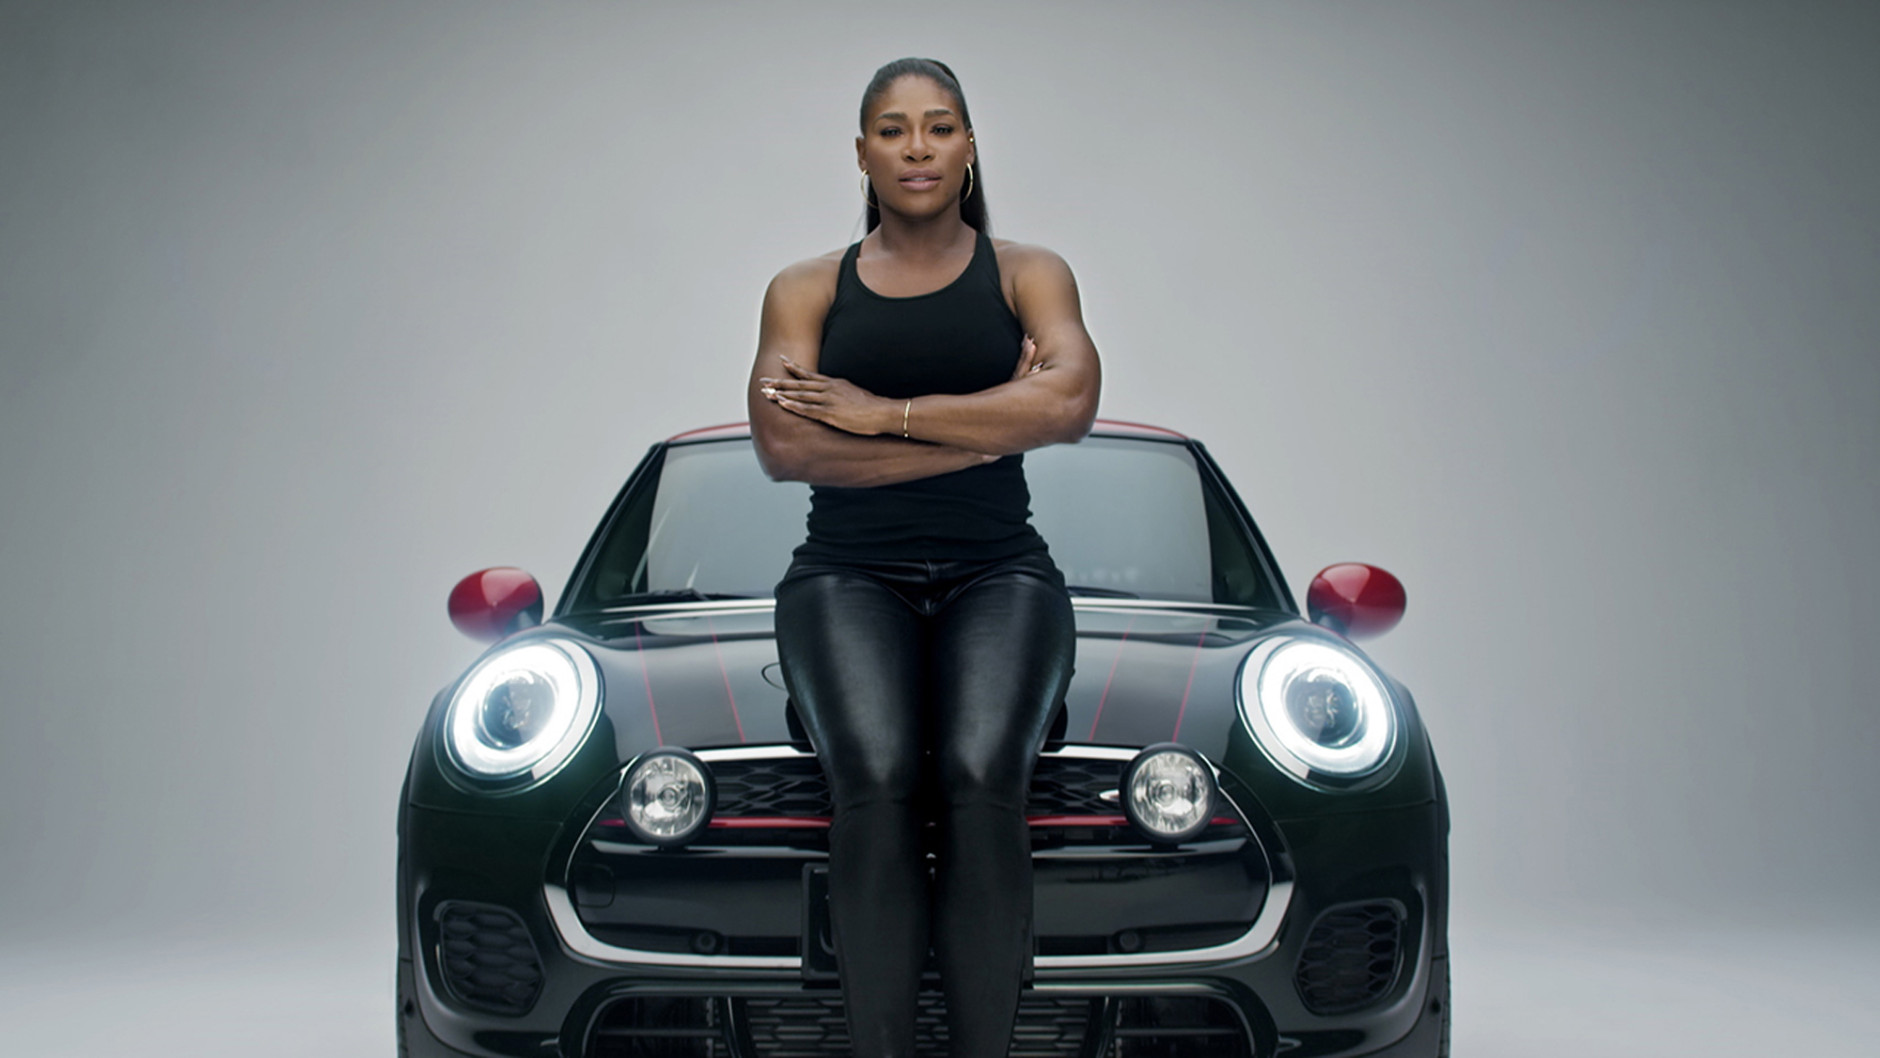 This image provided by Mini USA shows a still from the company's Super Bowl 50 "Defy Labels" ad spot featuring tennis star Serena Williams. Williams is one of several celebrities being featured in Mini USA's Super Bowl spot. (Mini USA via AP)